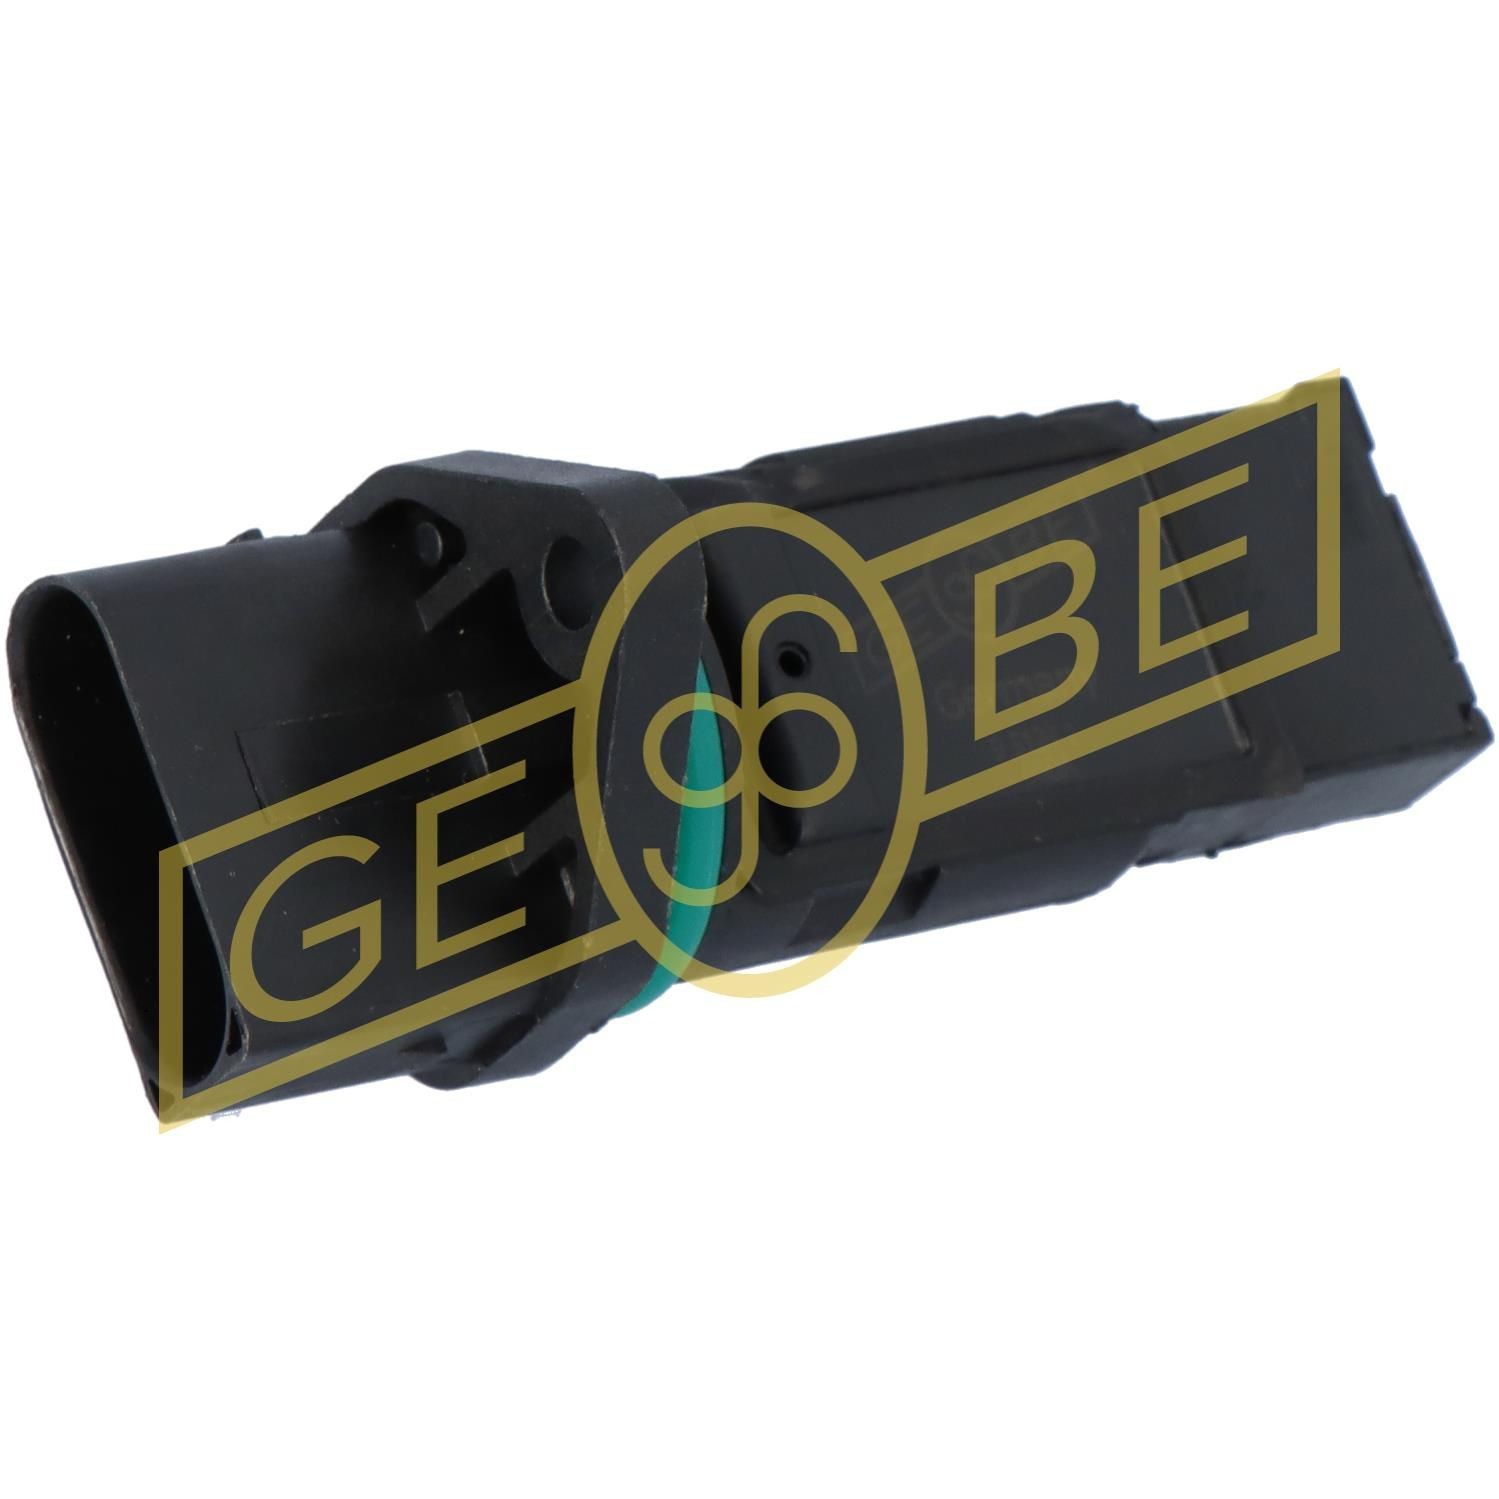 GEBE without housing Voltage: 12V, Number of pins: 5-pin connector MAF sensor 9 5124 1 buy